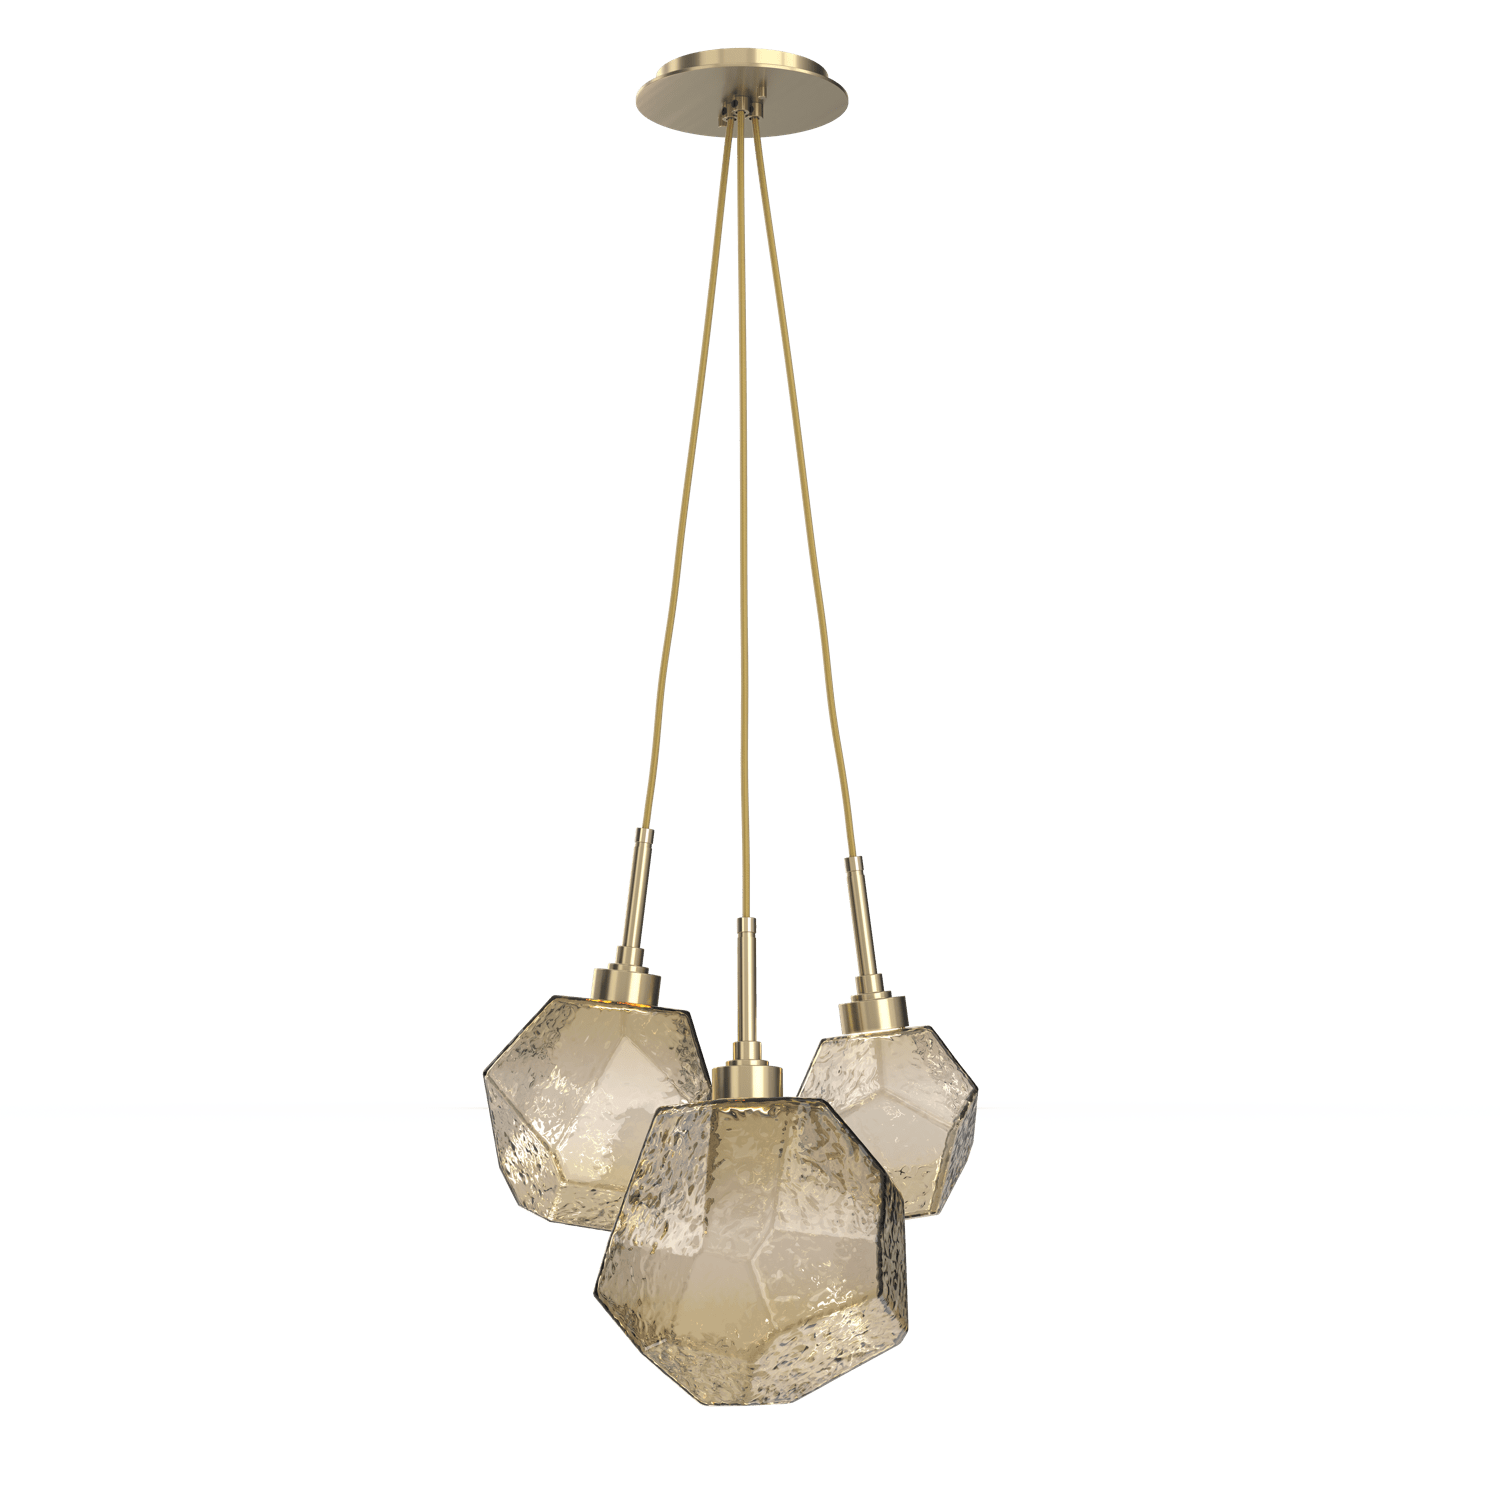 CHB0039-0E-HB-B-Hammerton-Studio-Gem-3-light-cluster-pendant-light-with-heritage-brass-finish-and-bronze-blown-glass-shades-and-LED-lamping